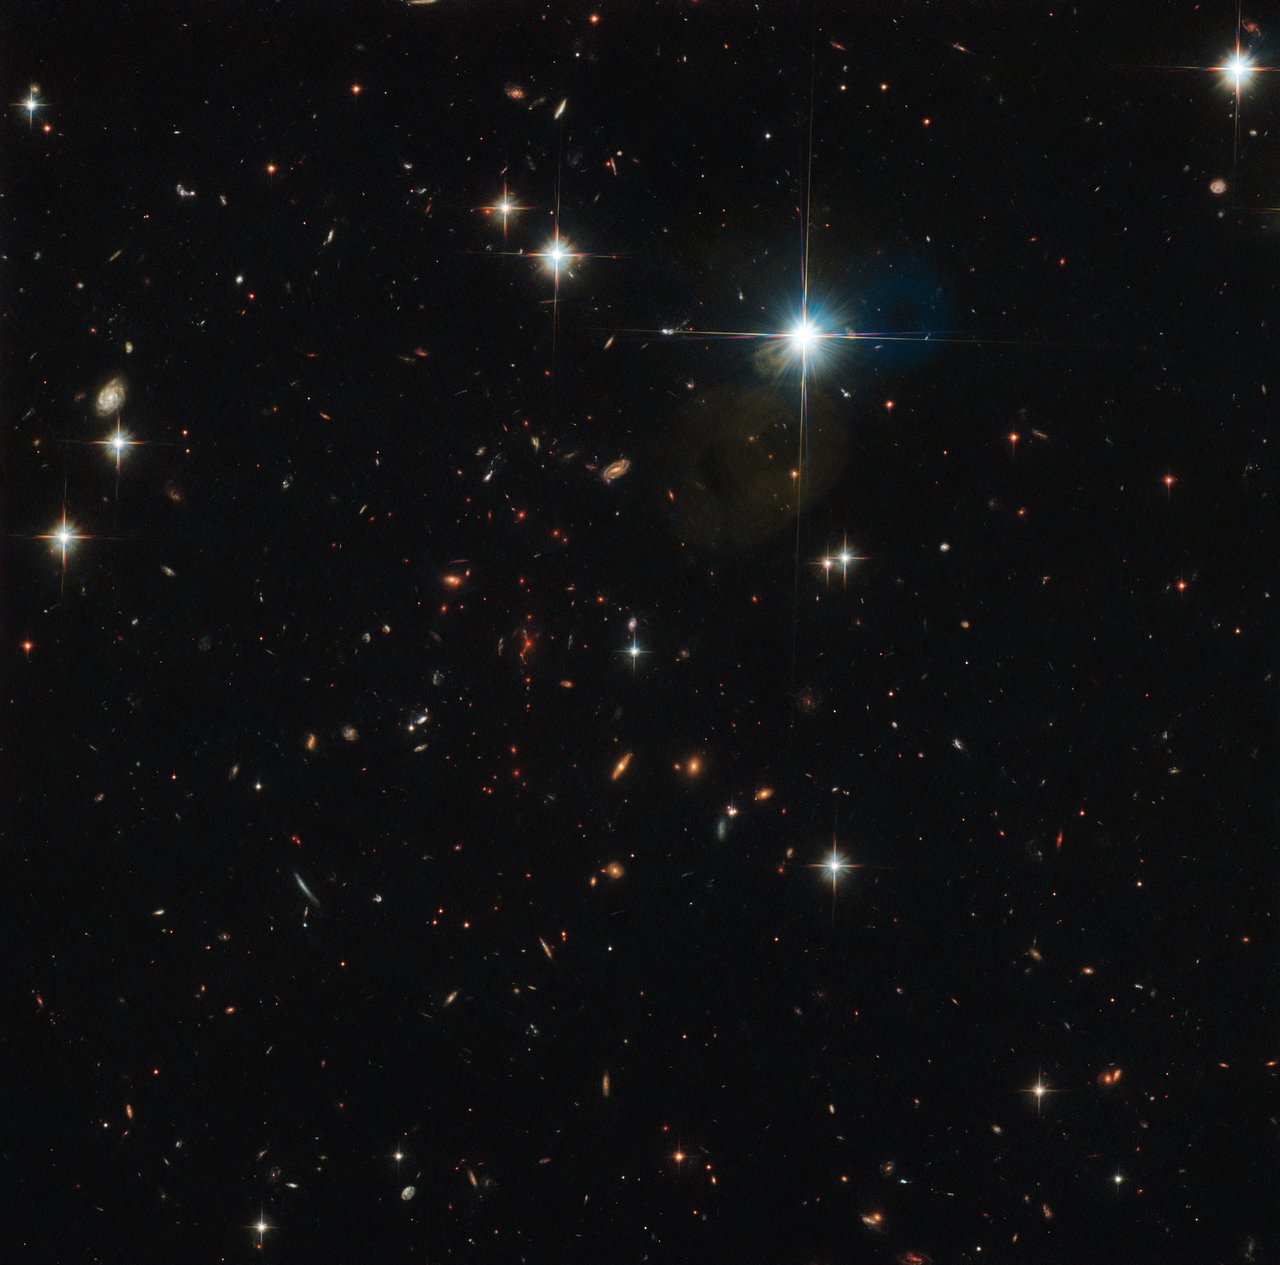 Hubble Peers at an Ancient Galaxy Cluster